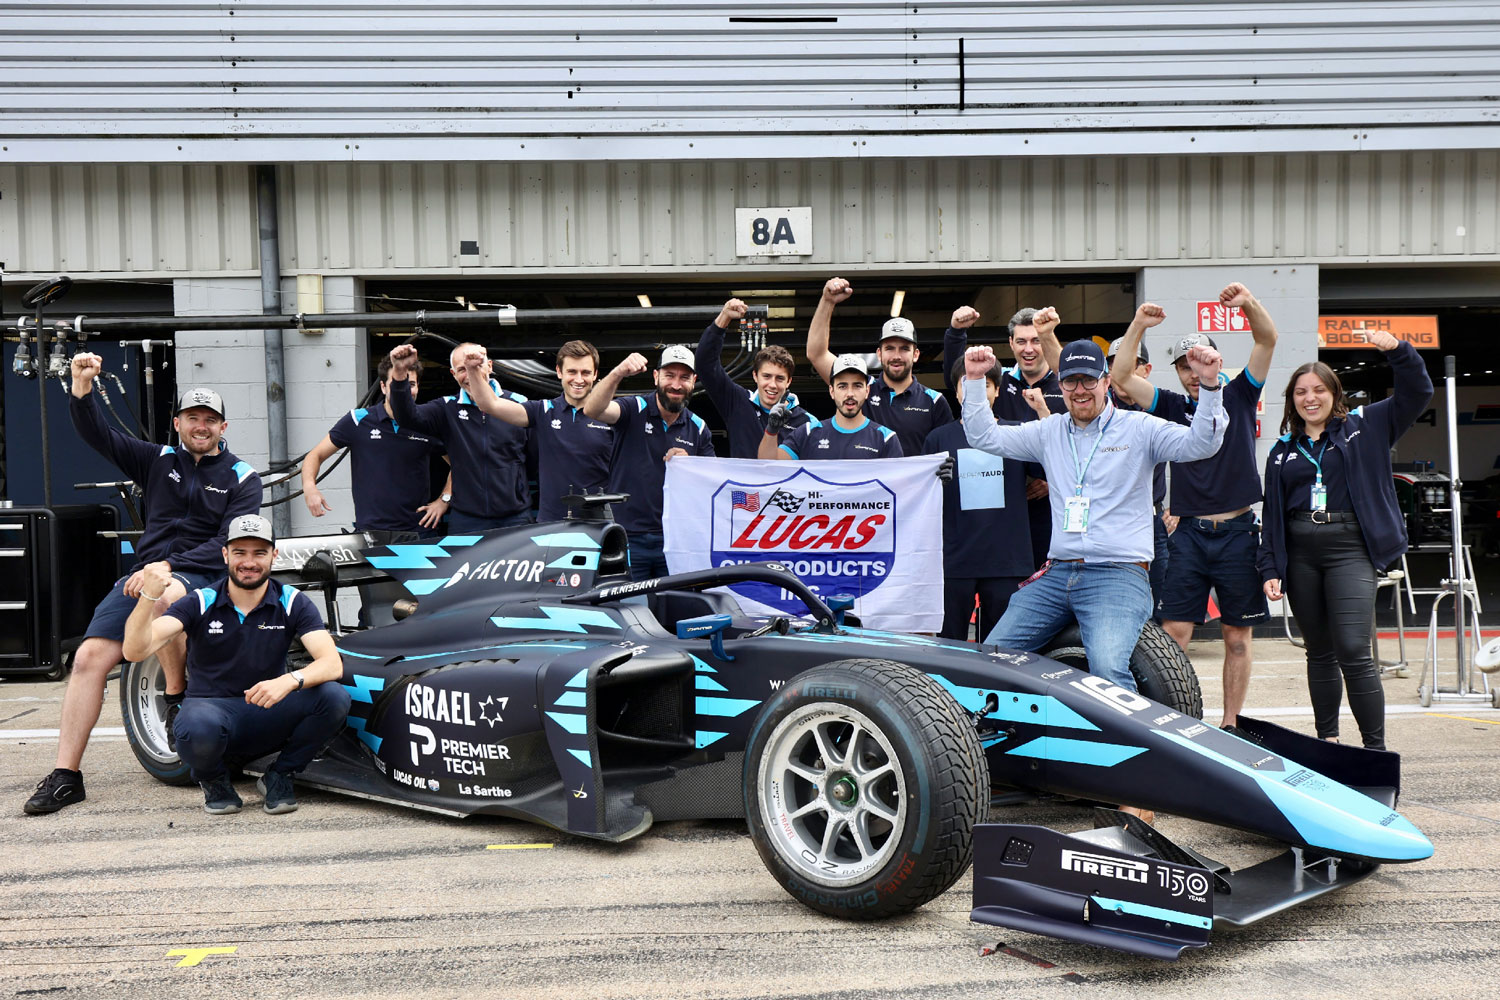 Lucas Oil UK’s Marketing Co-Ordinator Roo Pit joins the DAMS Team to celebrate the podium finish at Silverstone.